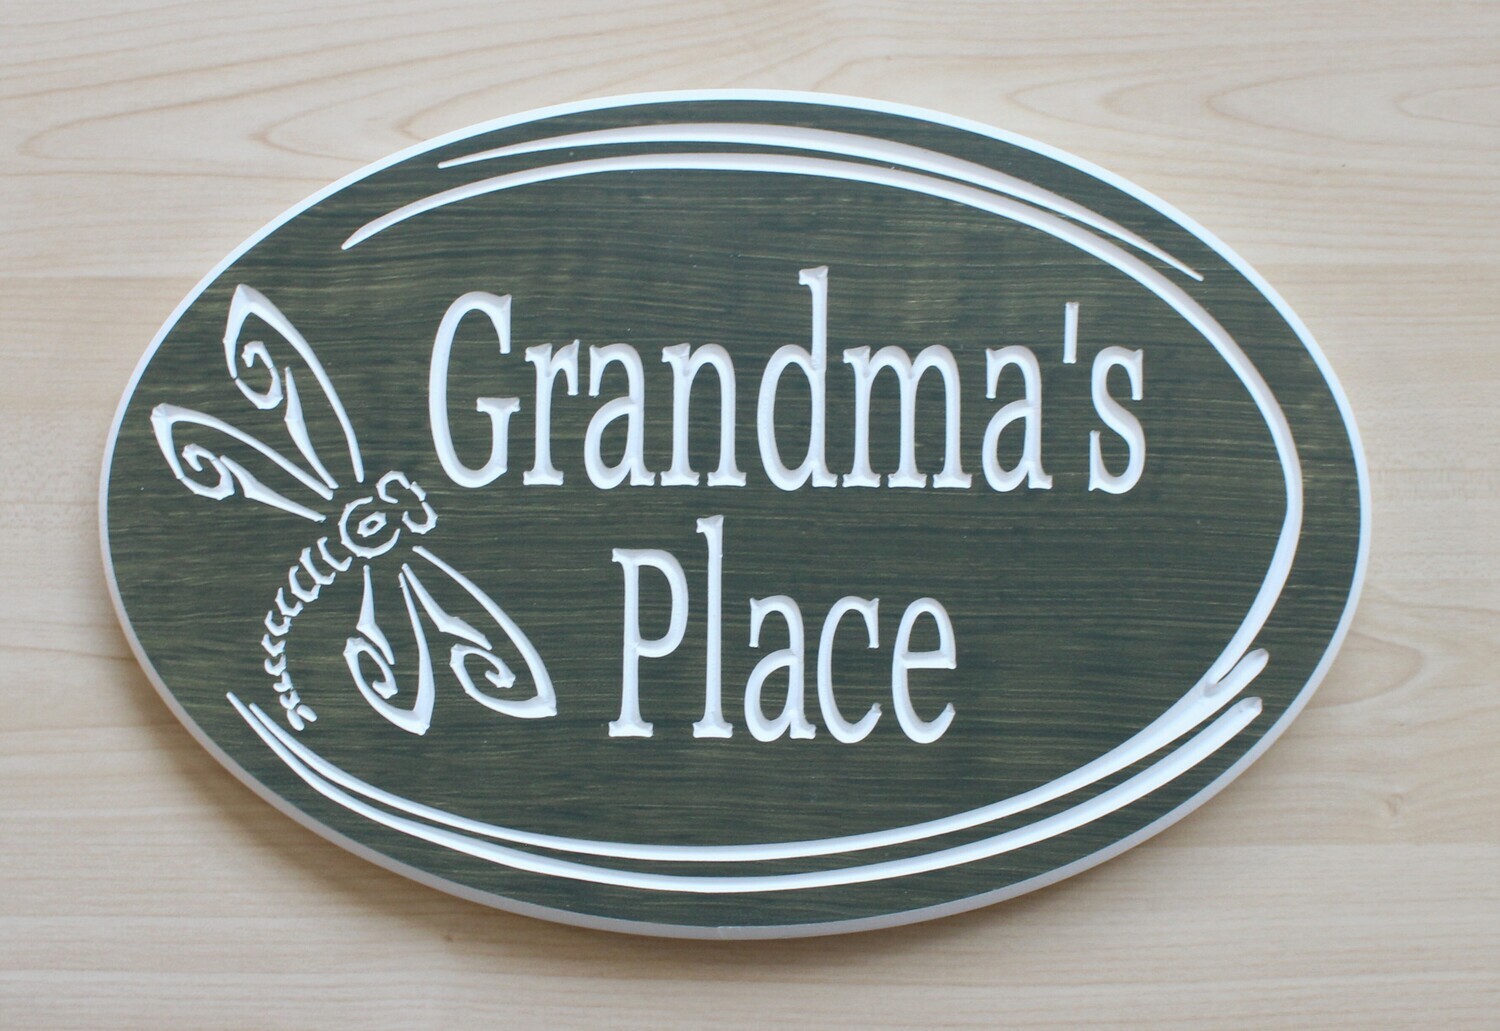 Dragonfly theme - Custom carved solid ¾ inch thick weather resistant PVC stained wood look sign for Cottage, She Shed,  Camp and Guest House - In a variety of colors with white carving.